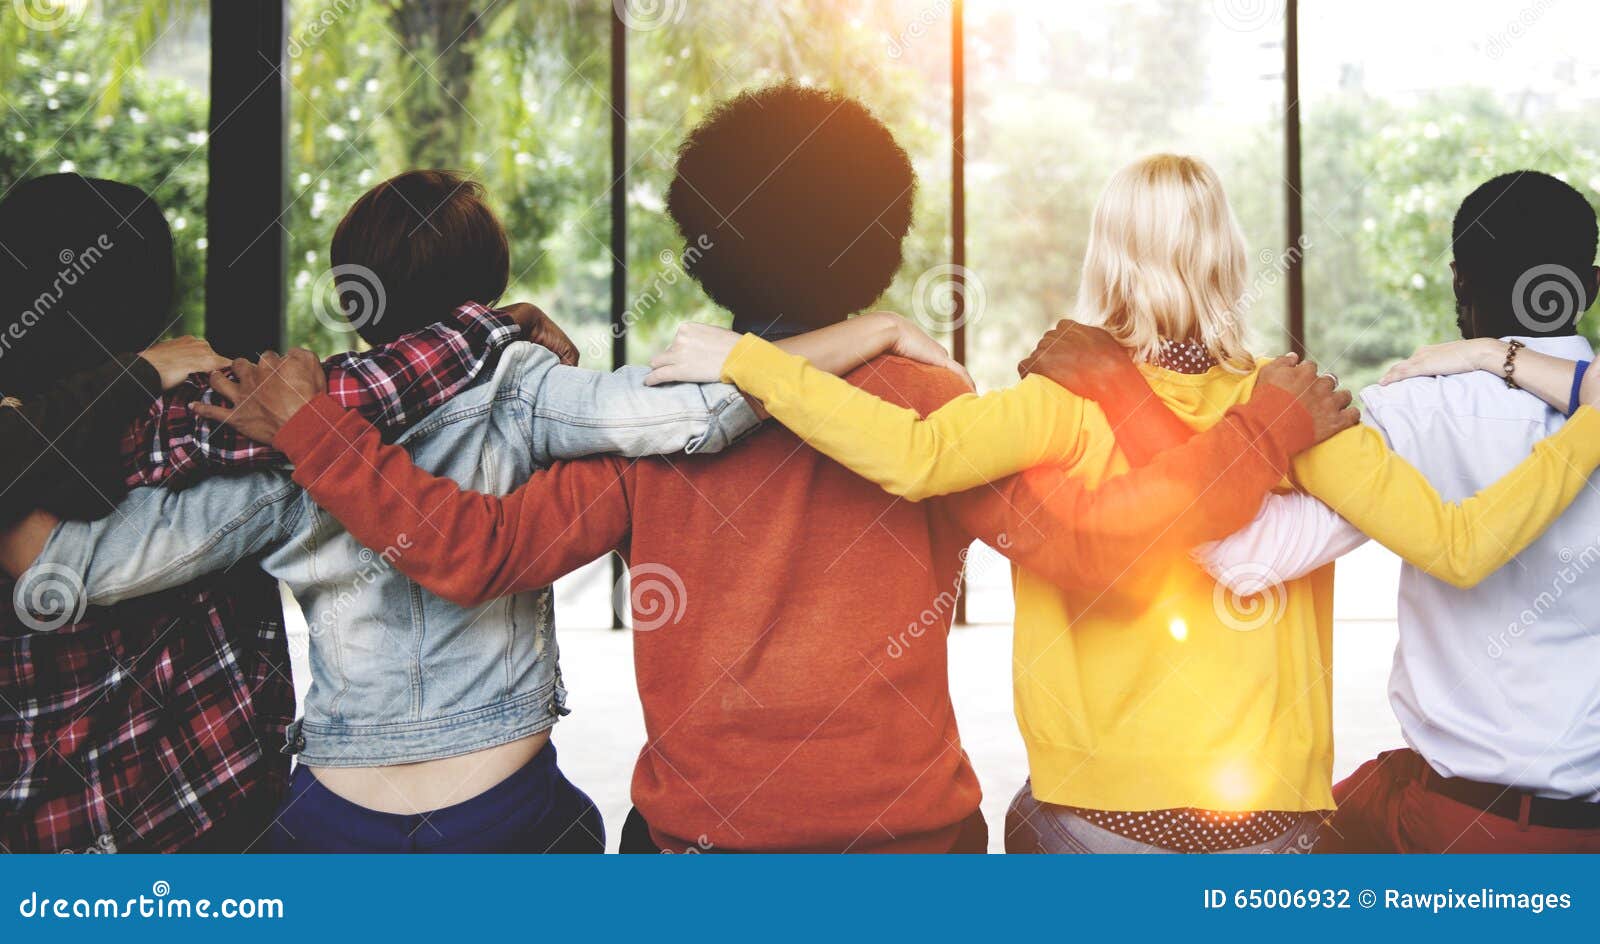 diverse people friendship togetherness connection rear concept